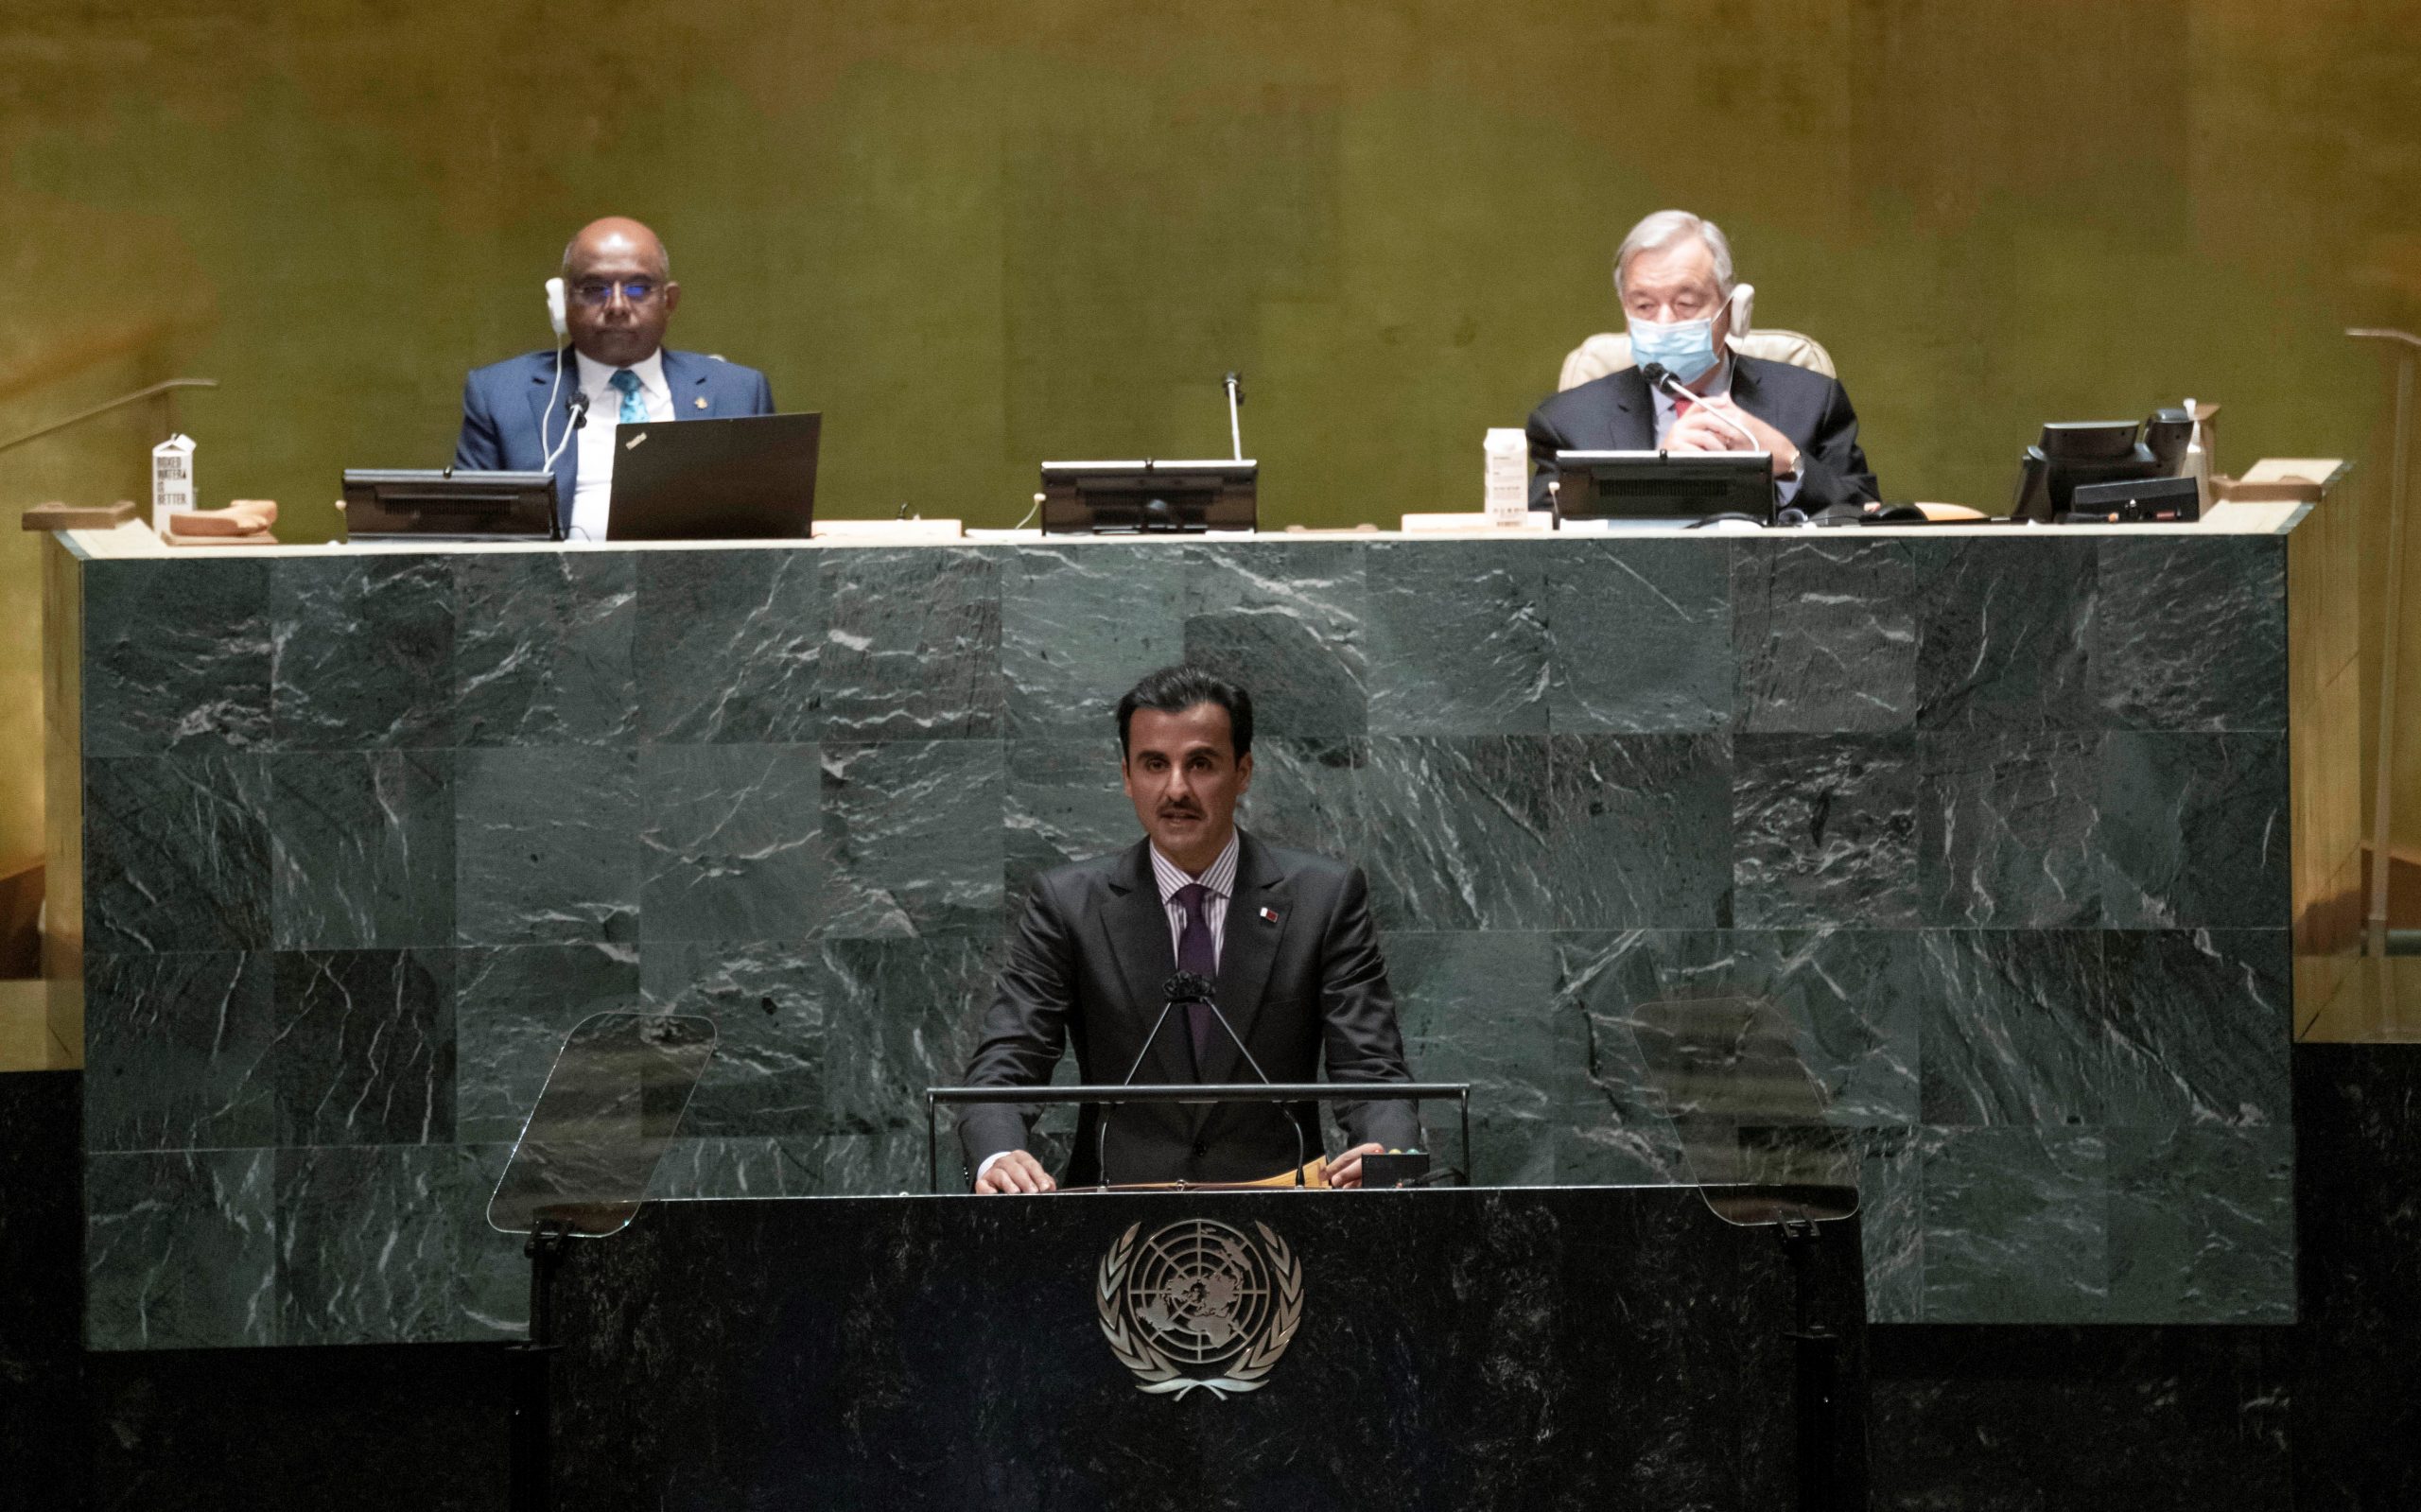 Amir Participates in Opening Session of the General Debate of the 76th Session of the UN General Assembly